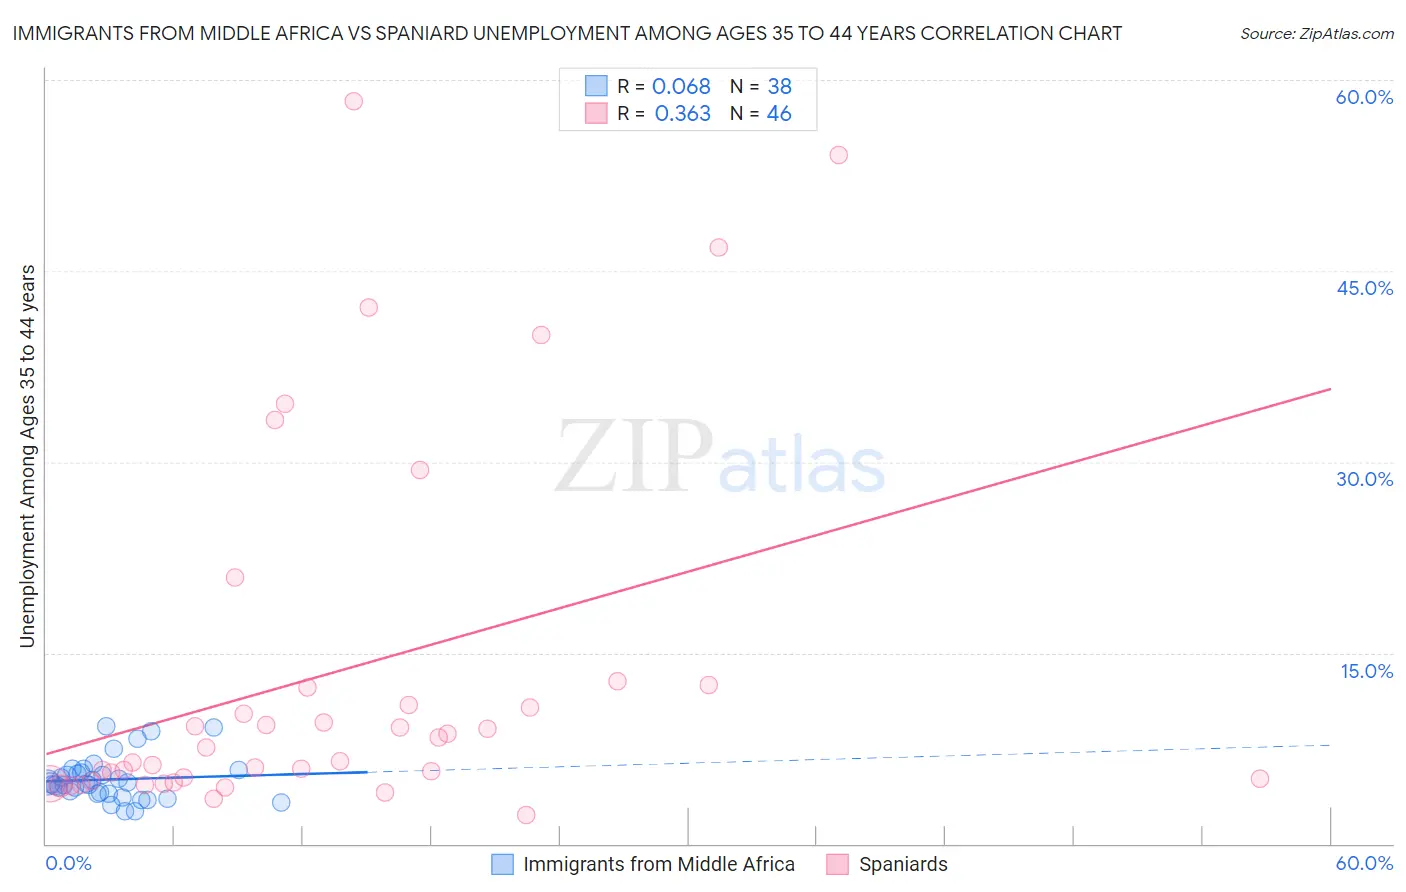 Immigrants from Middle Africa vs Spaniard Unemployment Among Ages 35 to 44 years